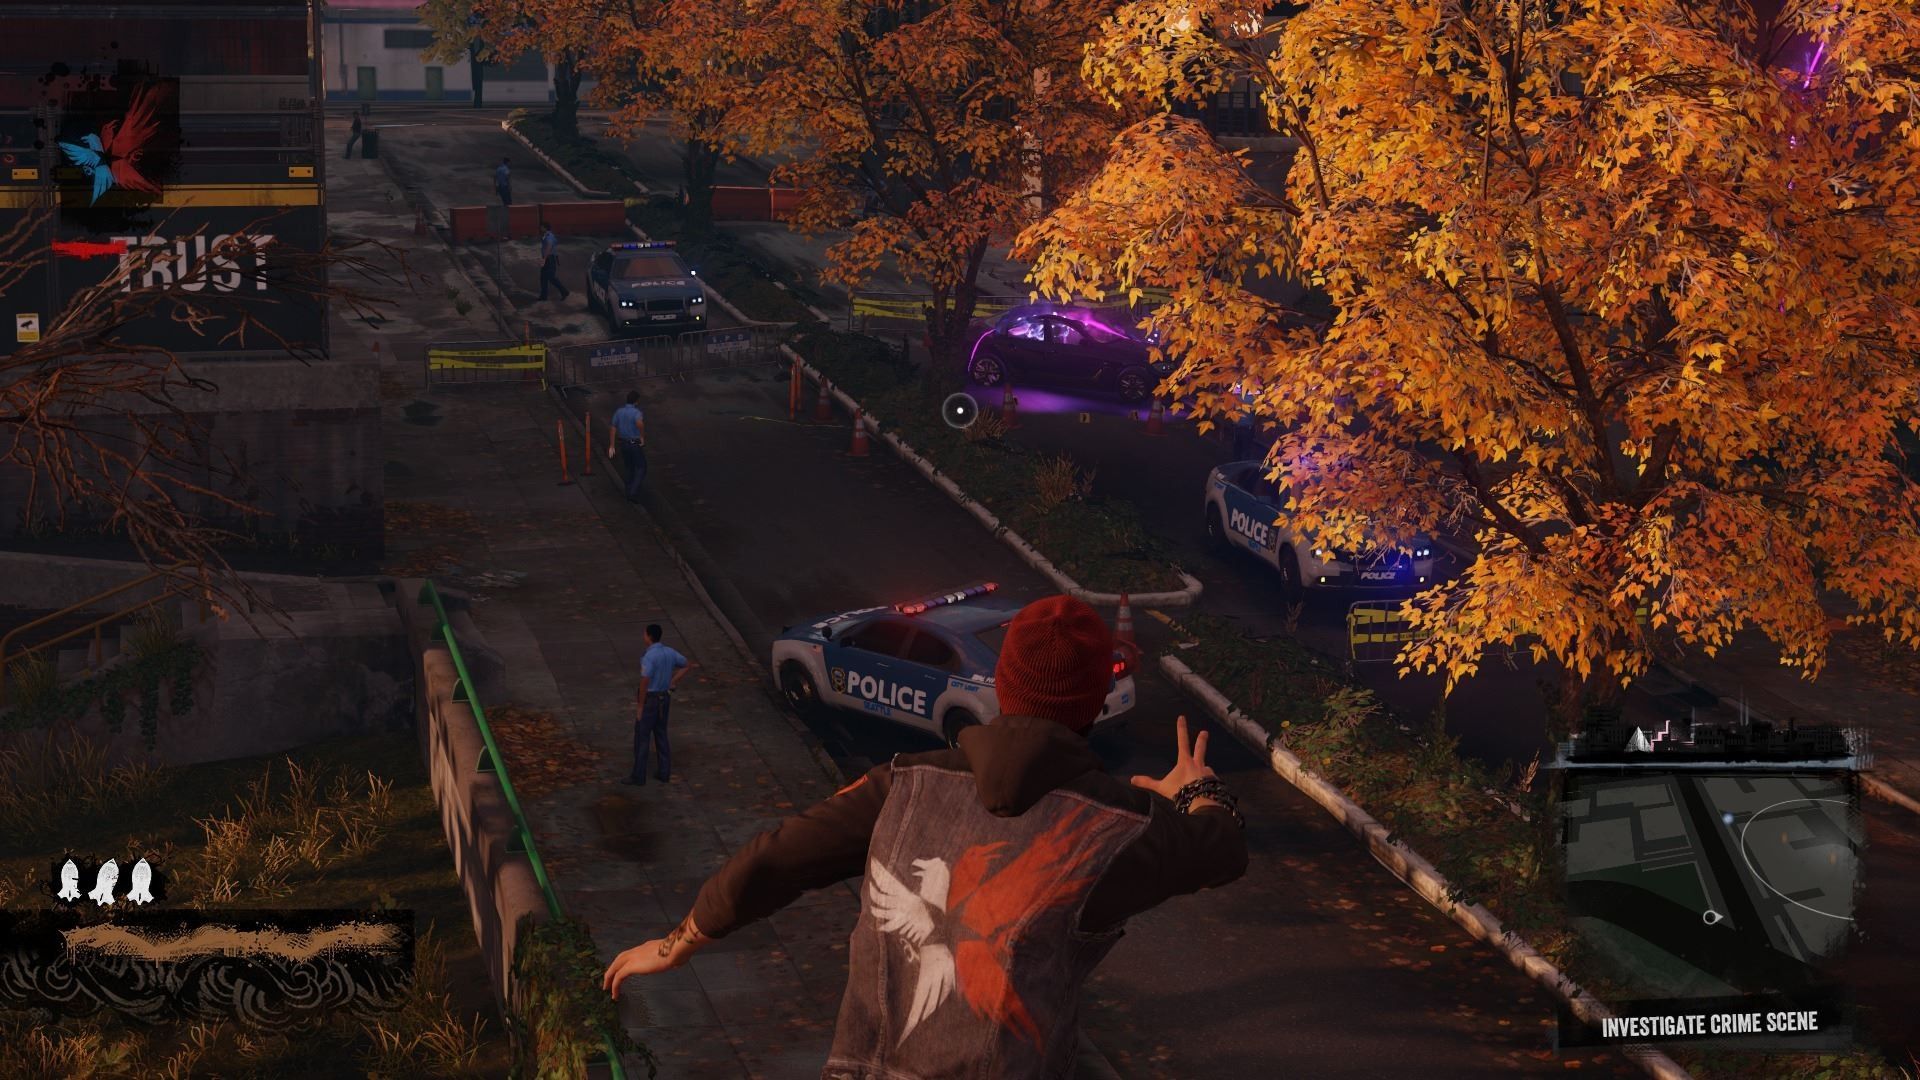 Games is soon. Infamous: second son. Second son геймплей. Infamous second son Gameplay. Второй сын геймплей.